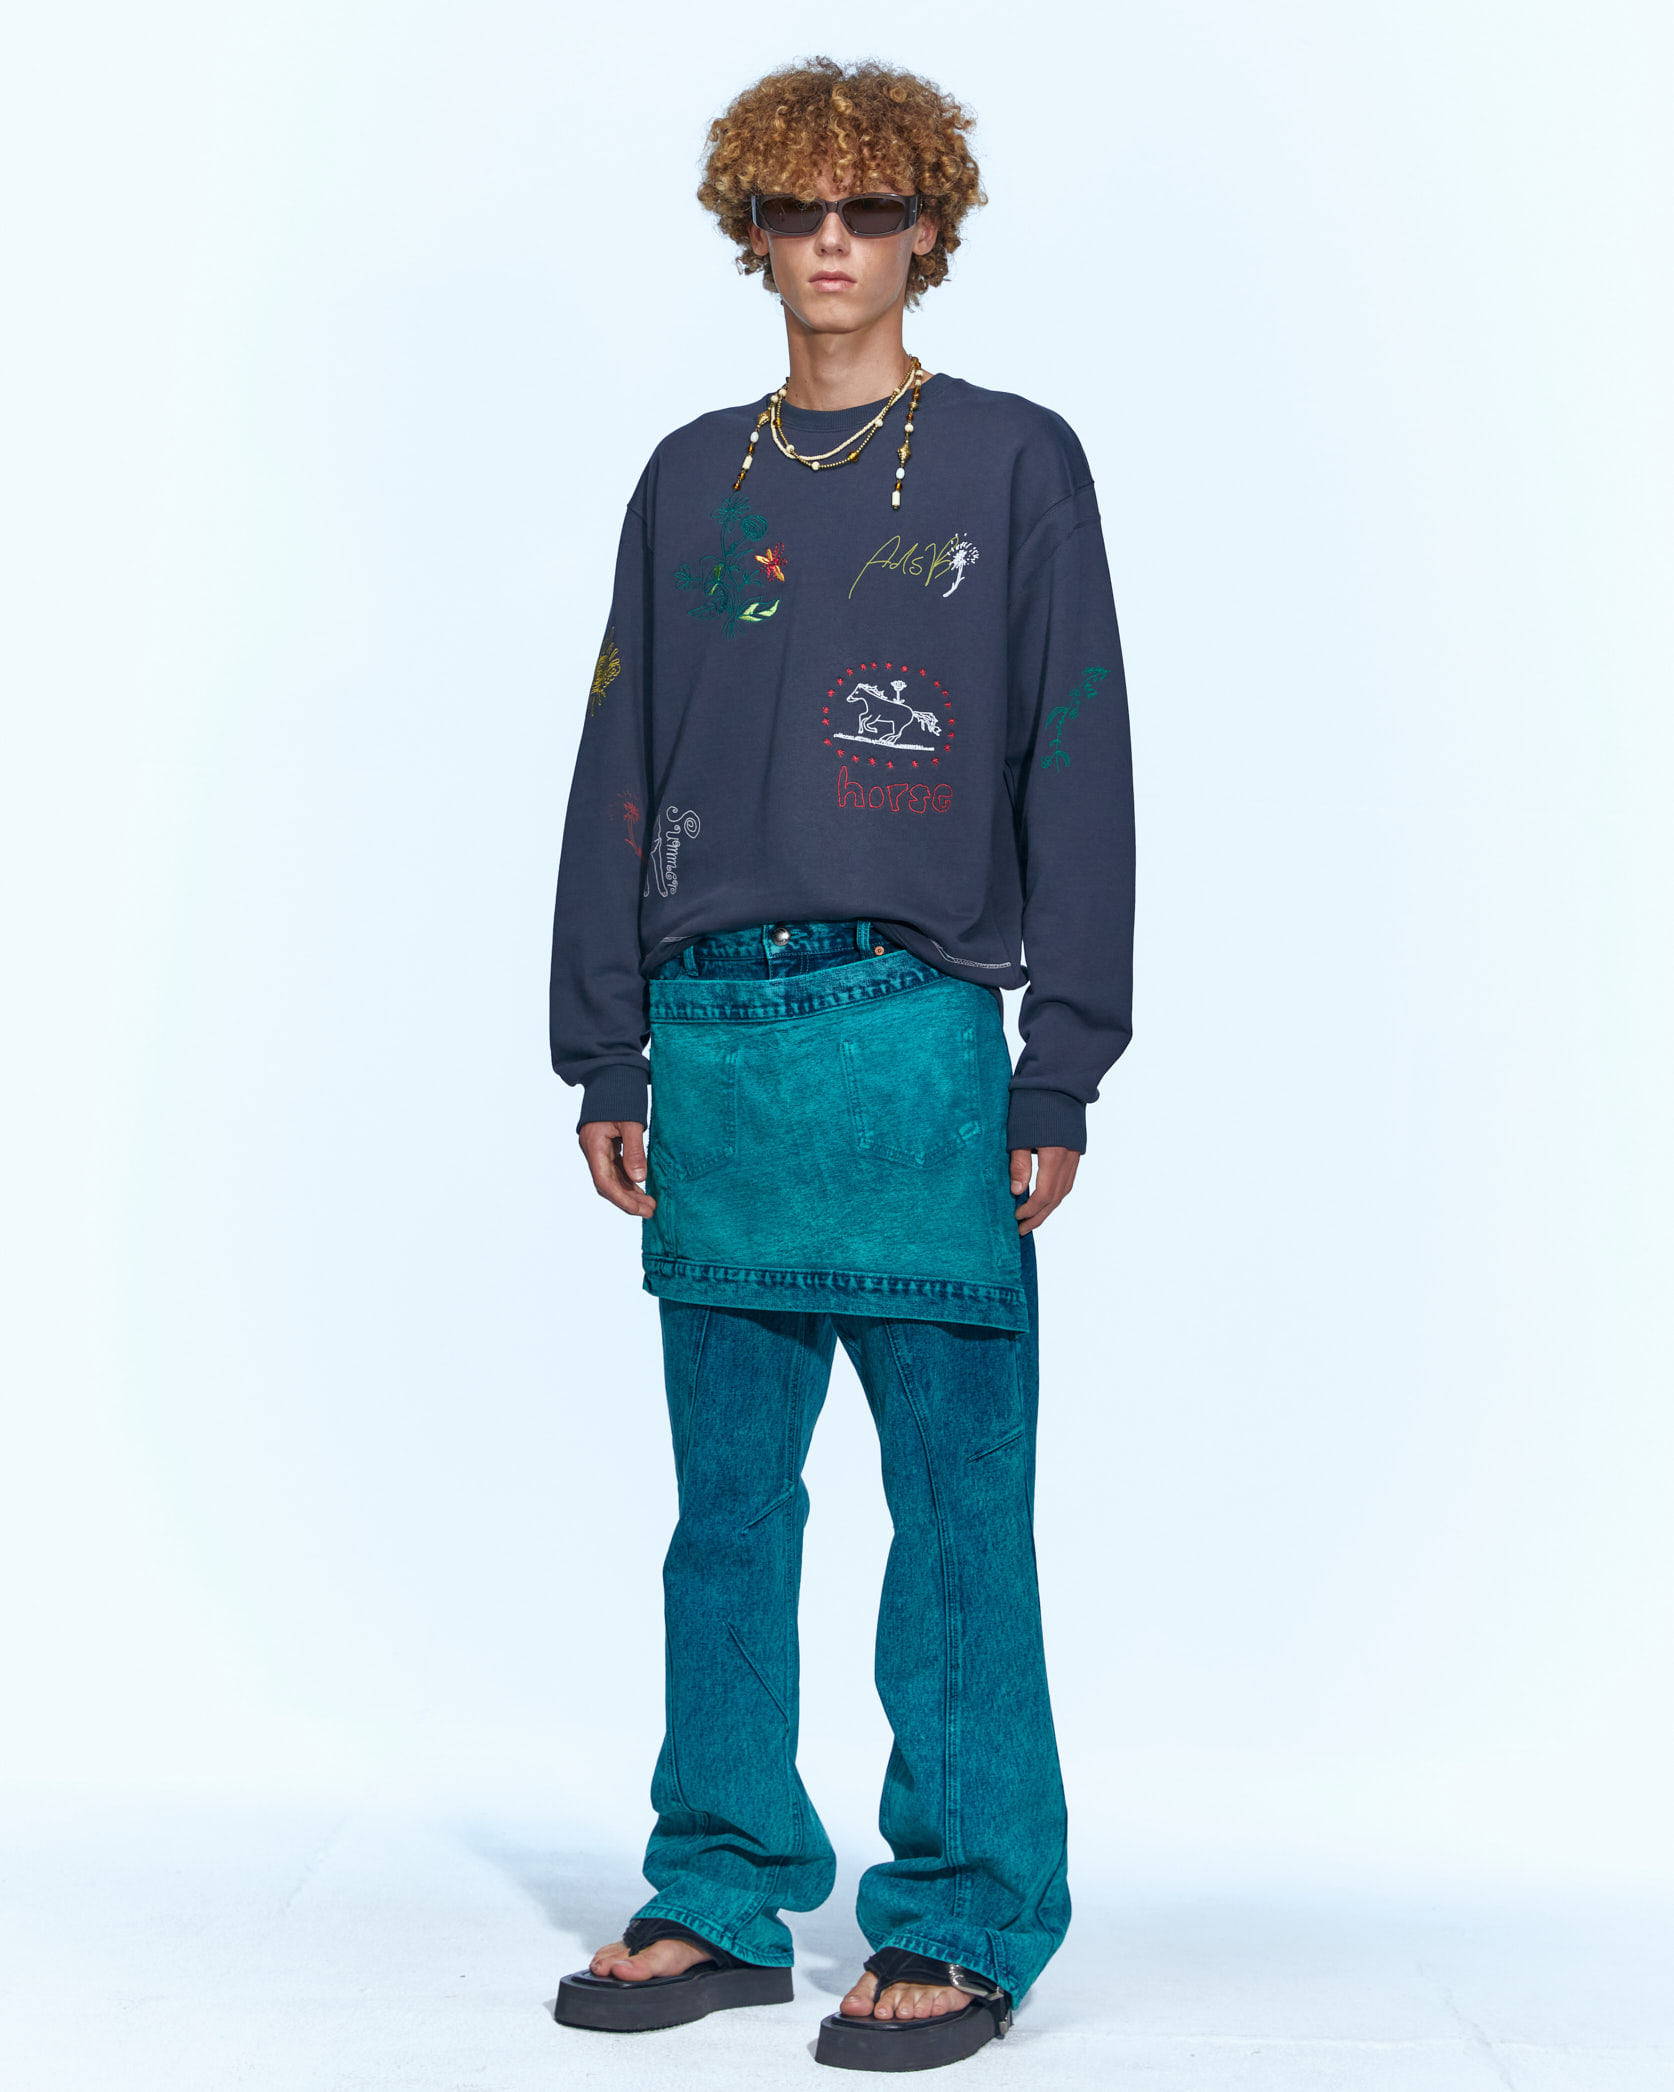 S/S RTW MEN 23 – Andersson Bell